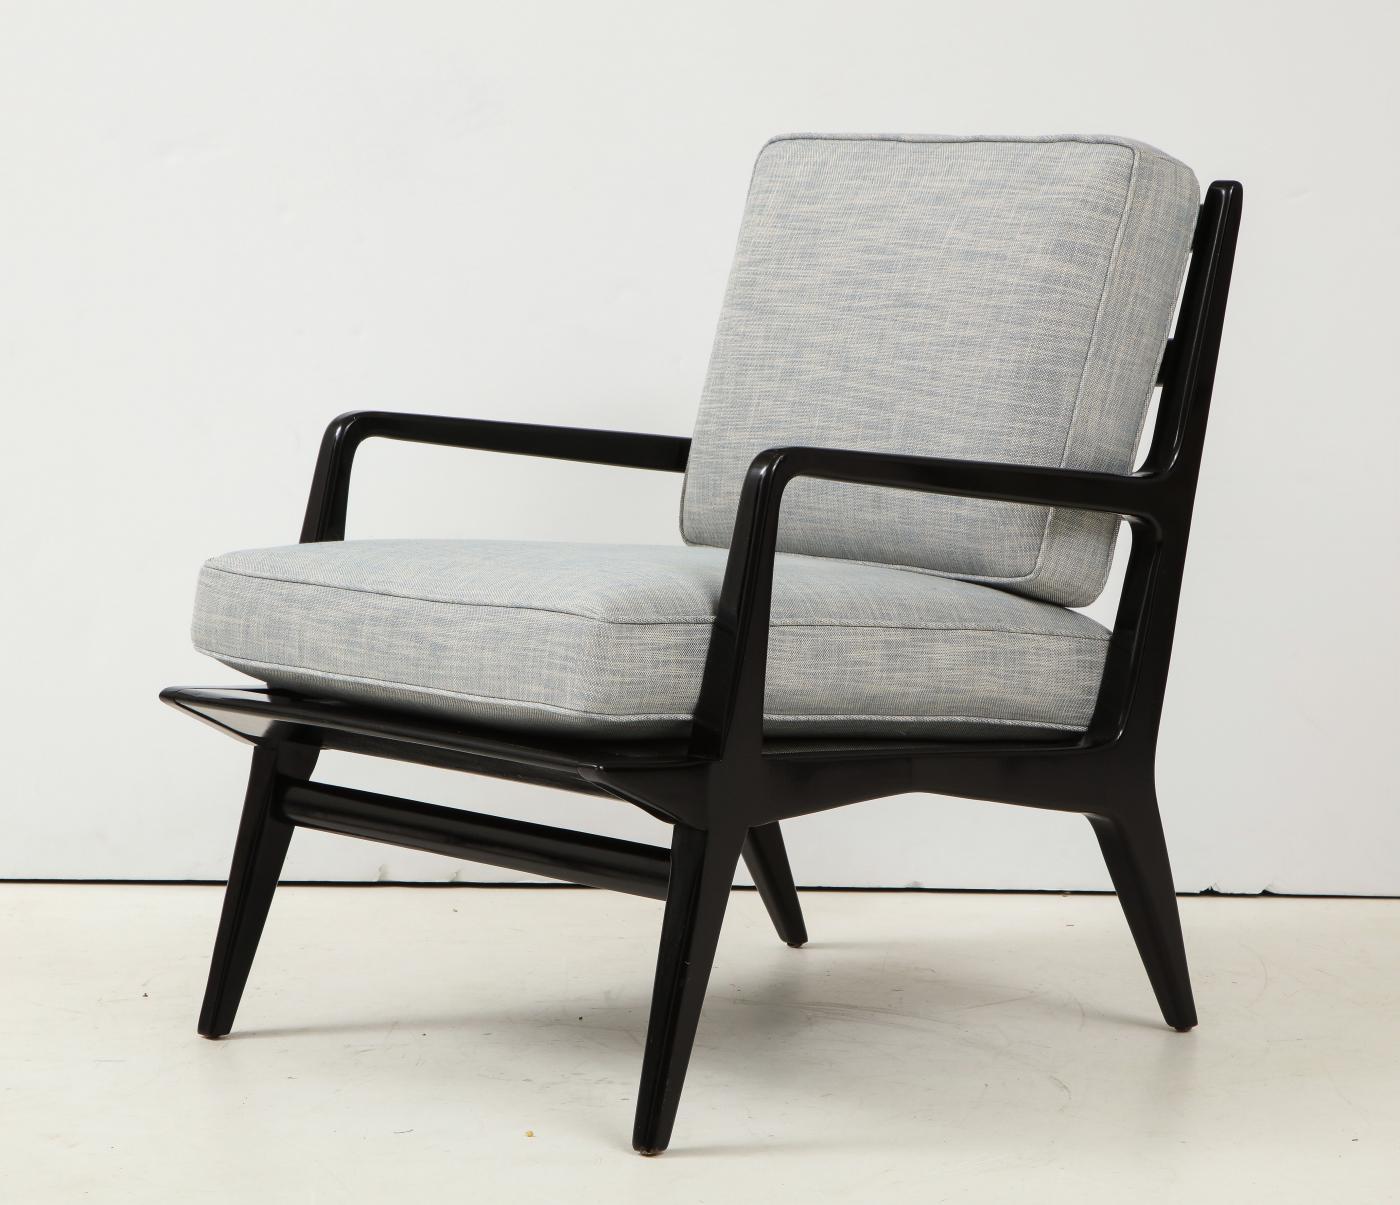 Lounge chair and ottoman. Carlo di Carli for M. Singer & Sons